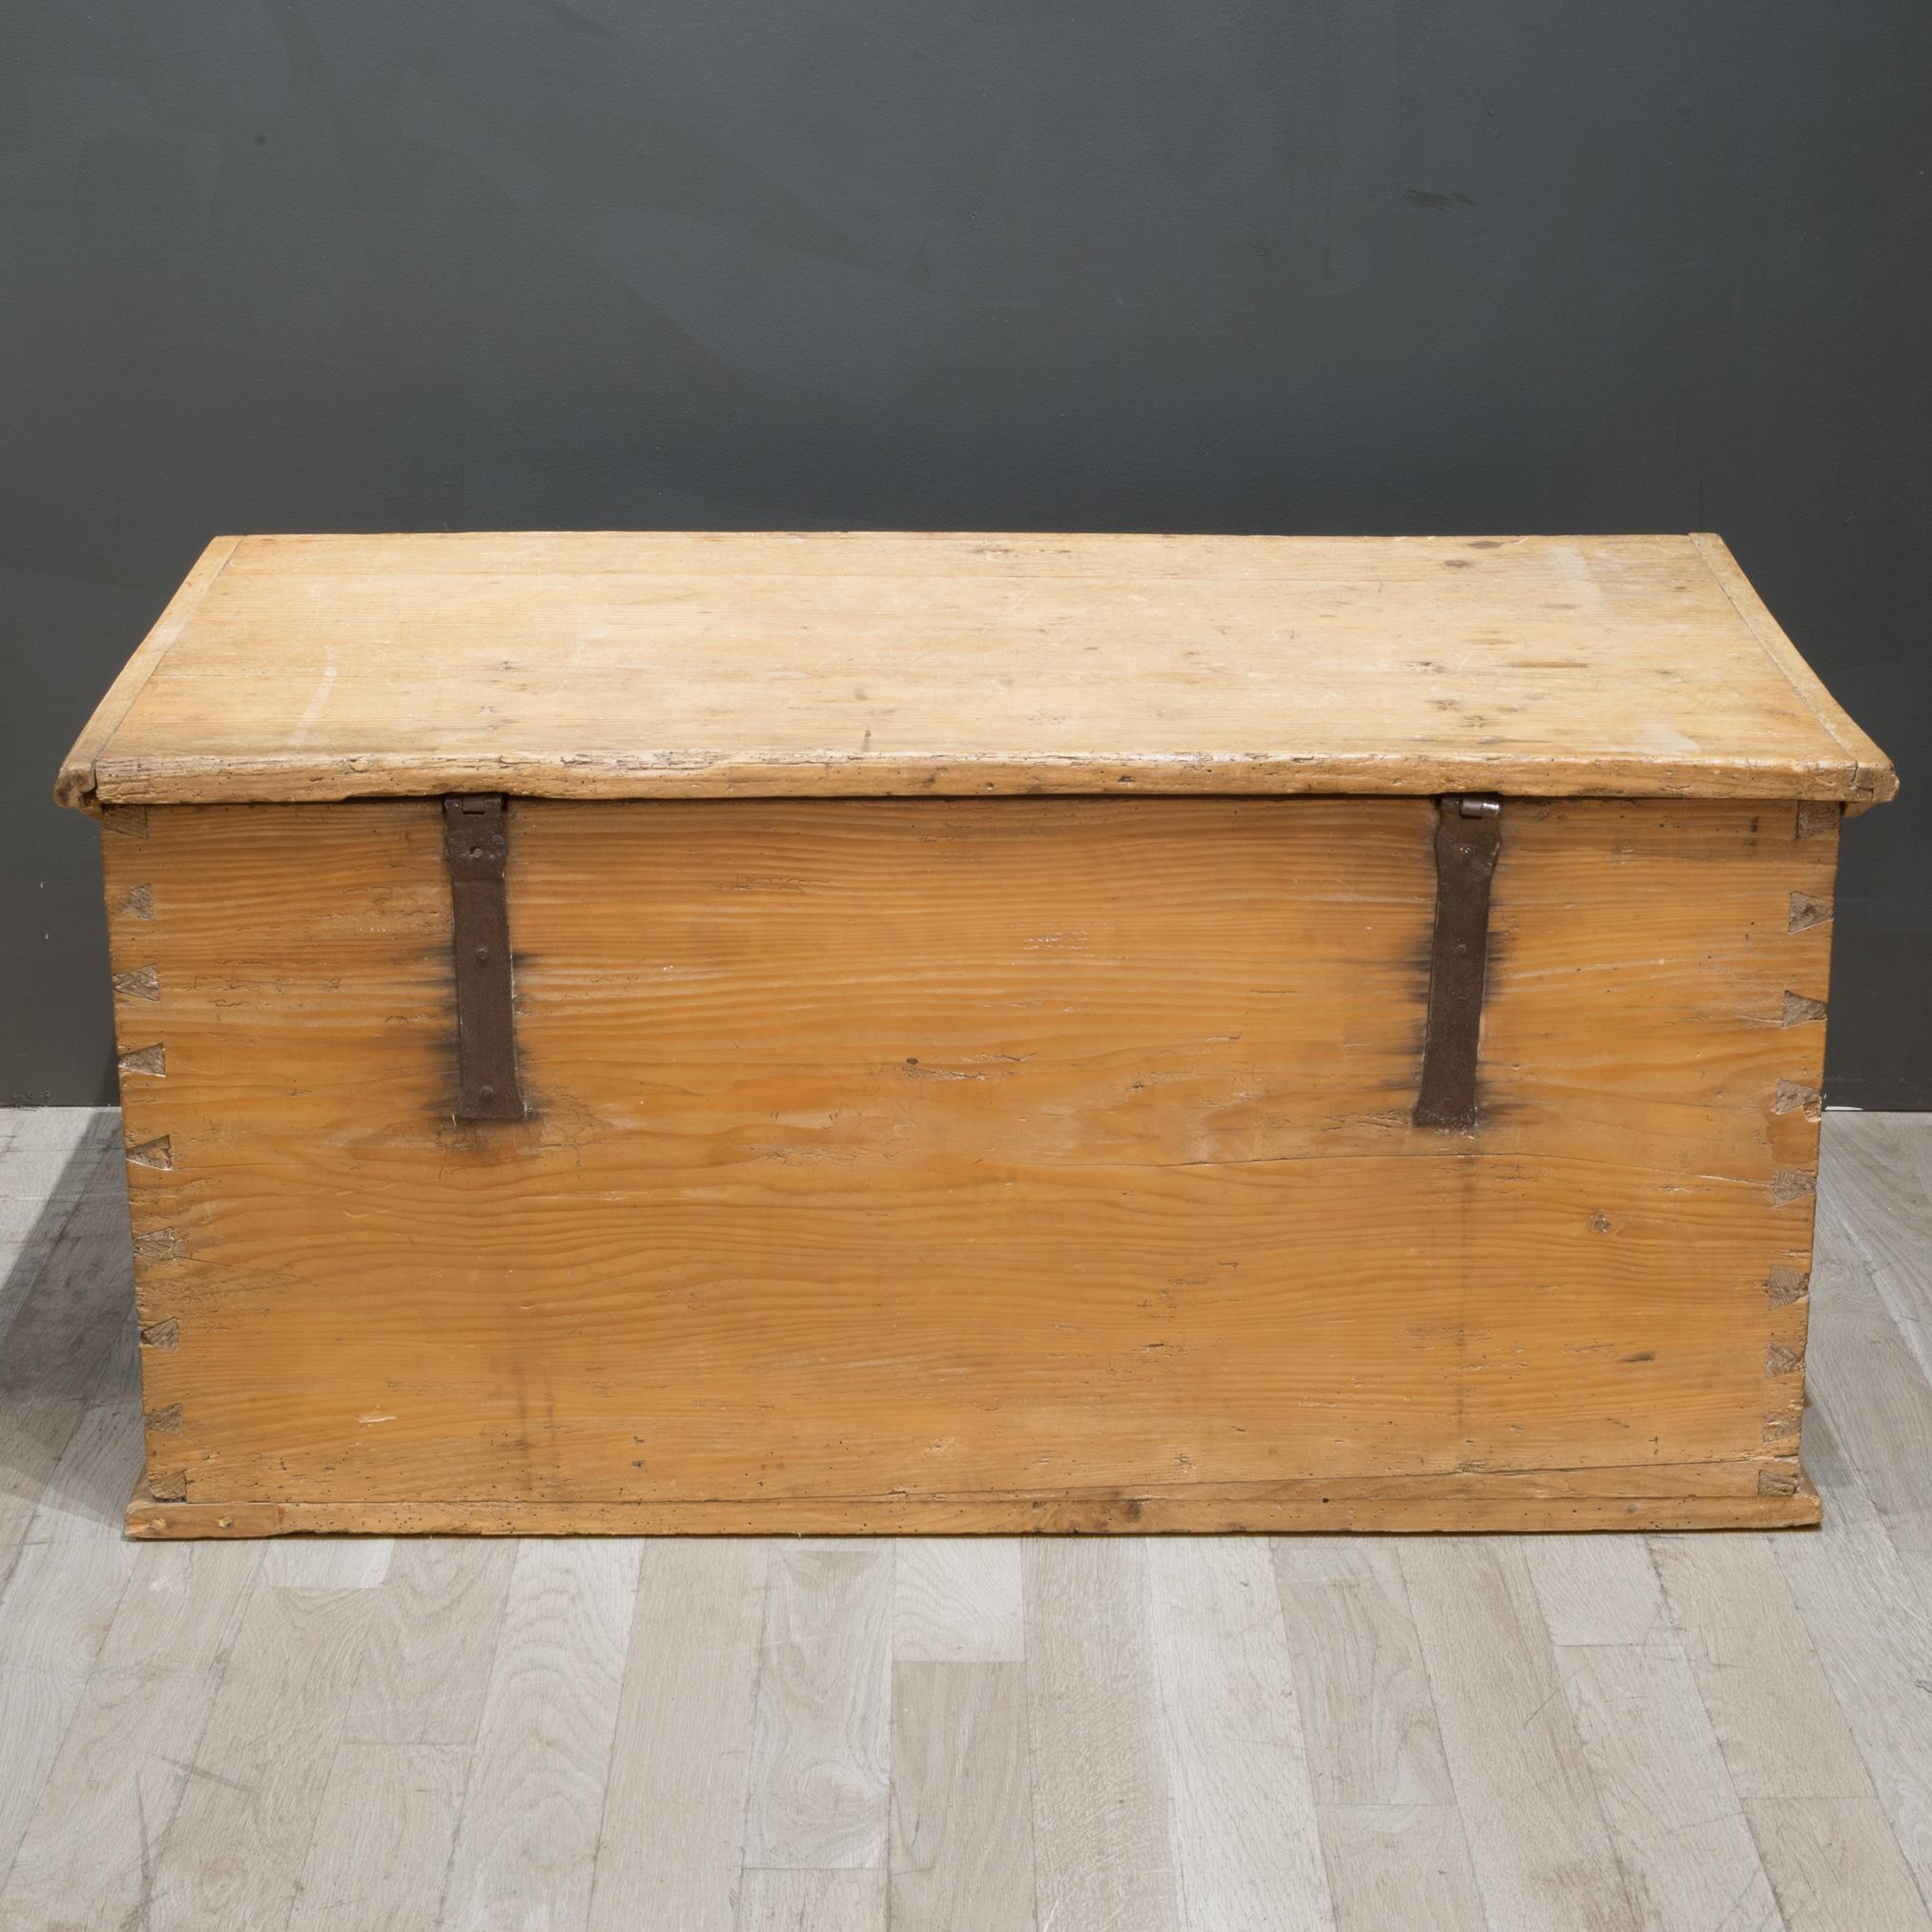 American Late 19th/Early 20th C. Blanket Chest c.1880-1920